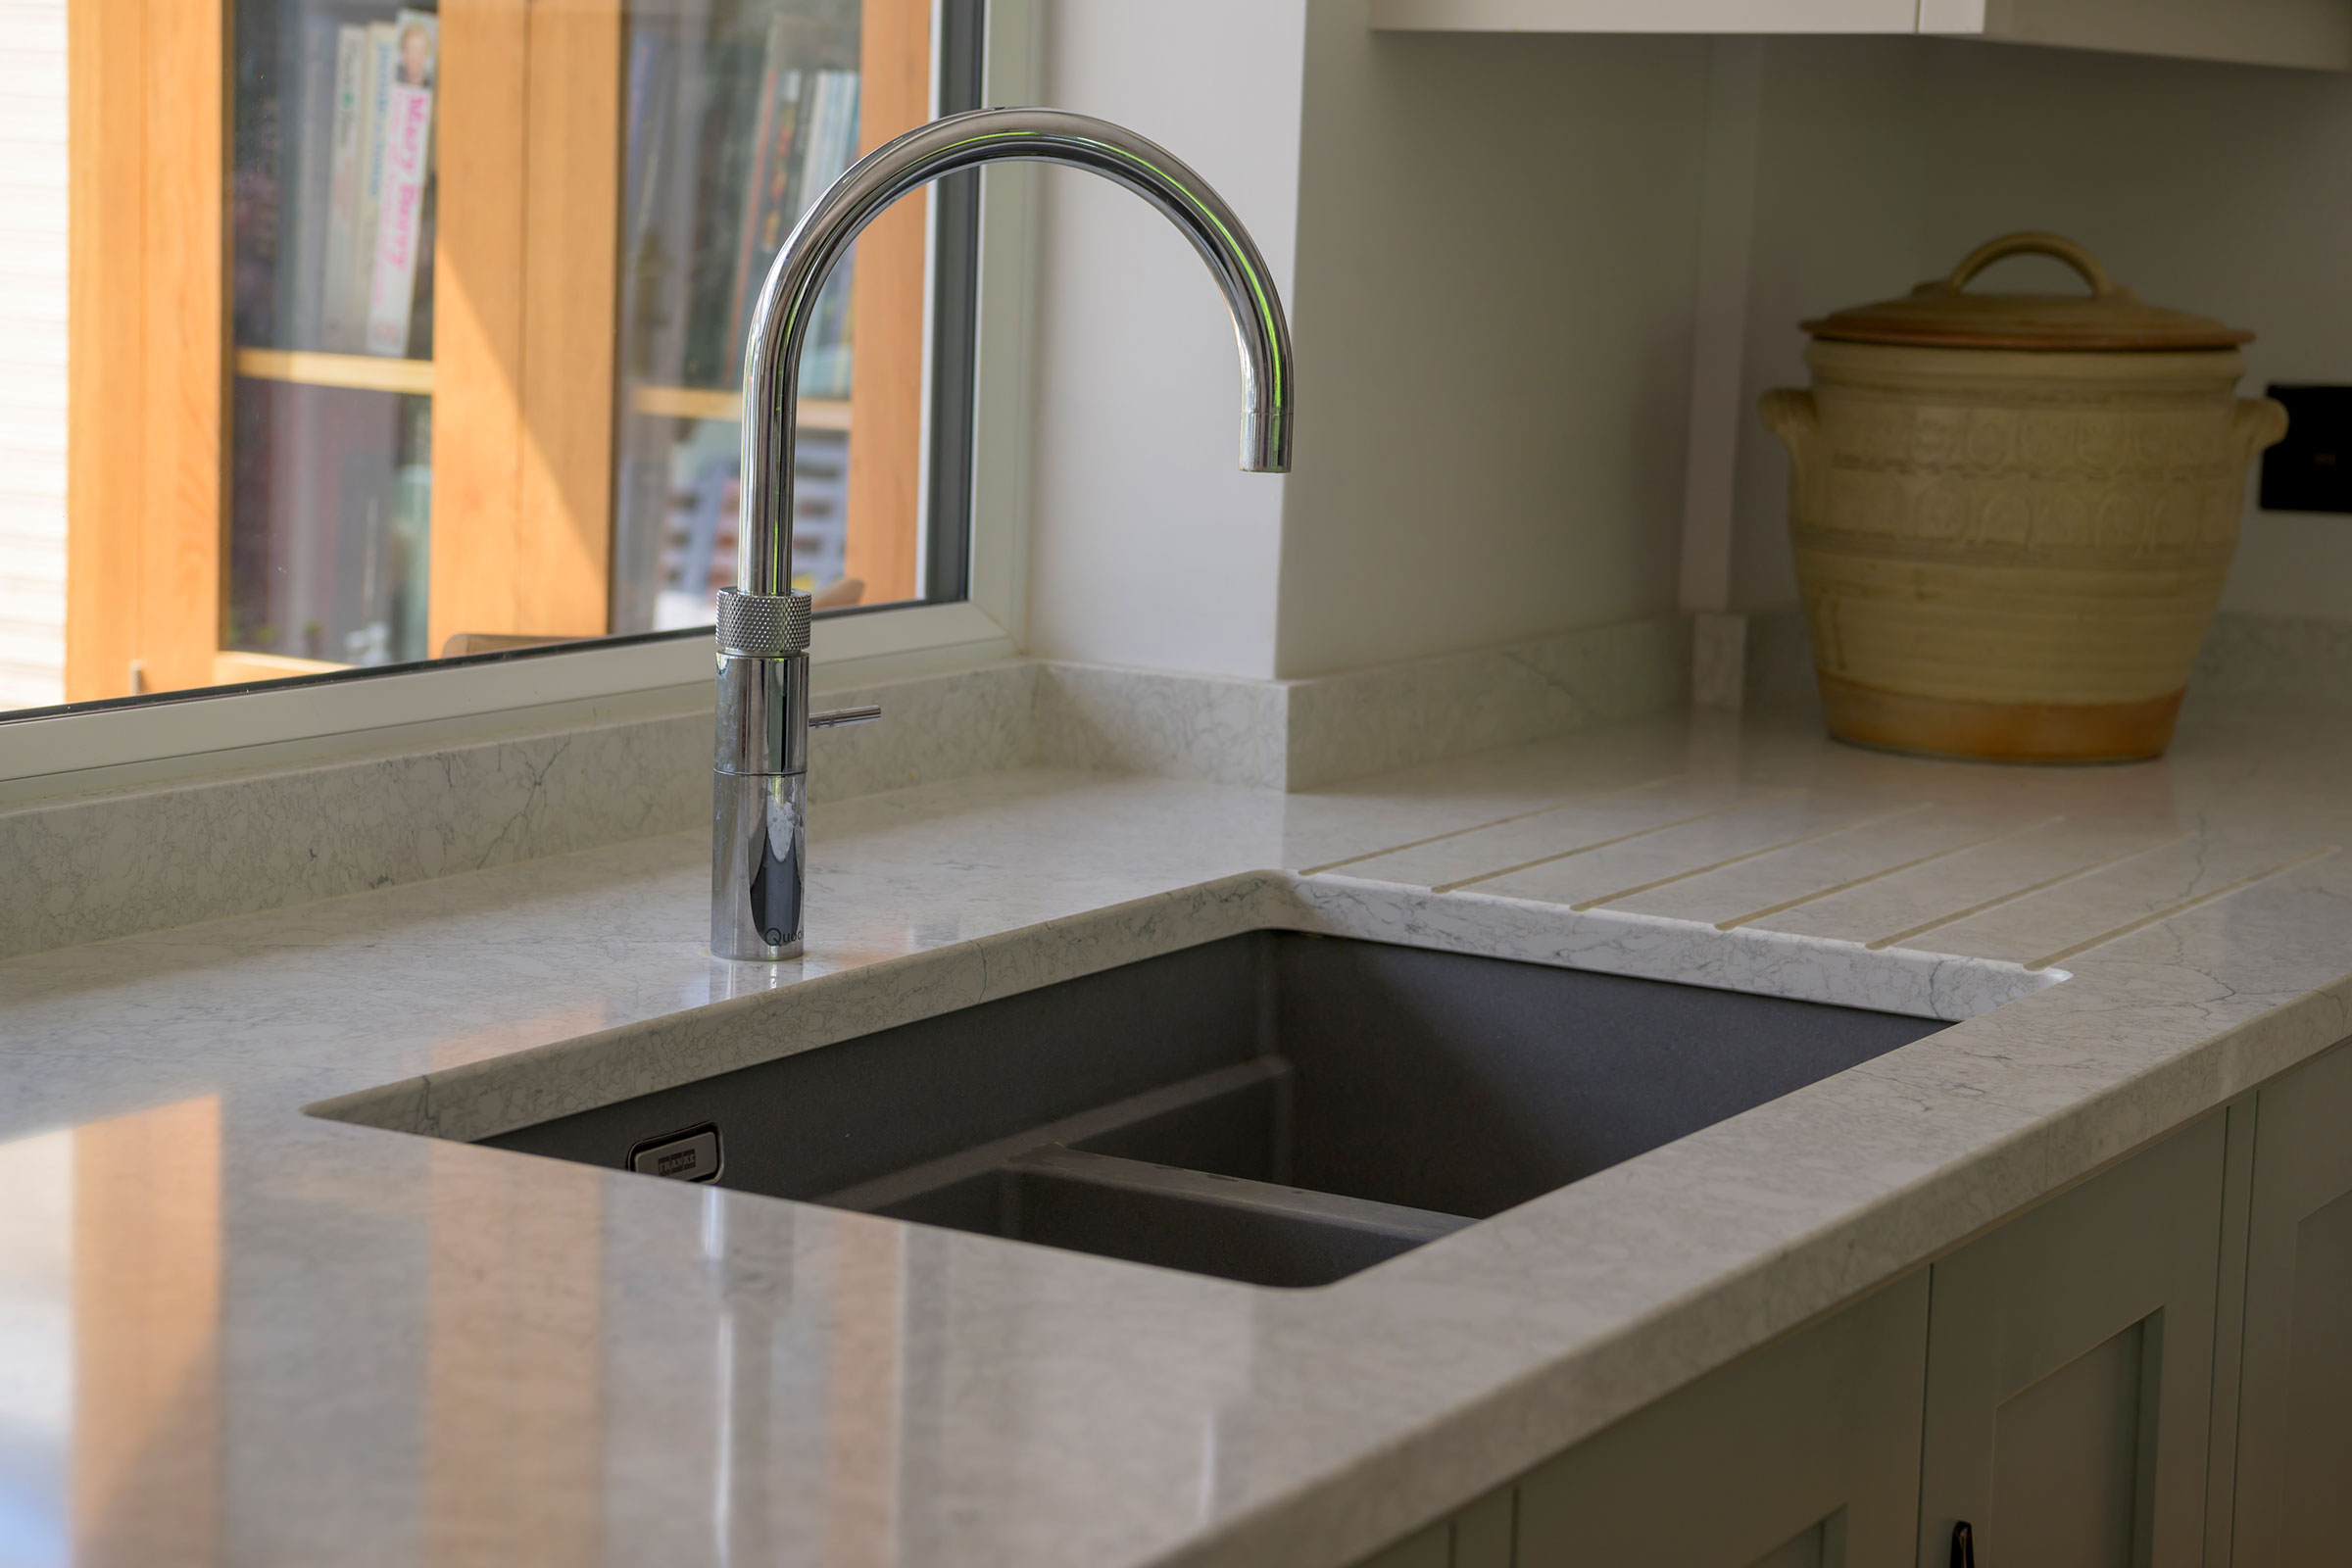 Utility Room sink by KitchenMakers